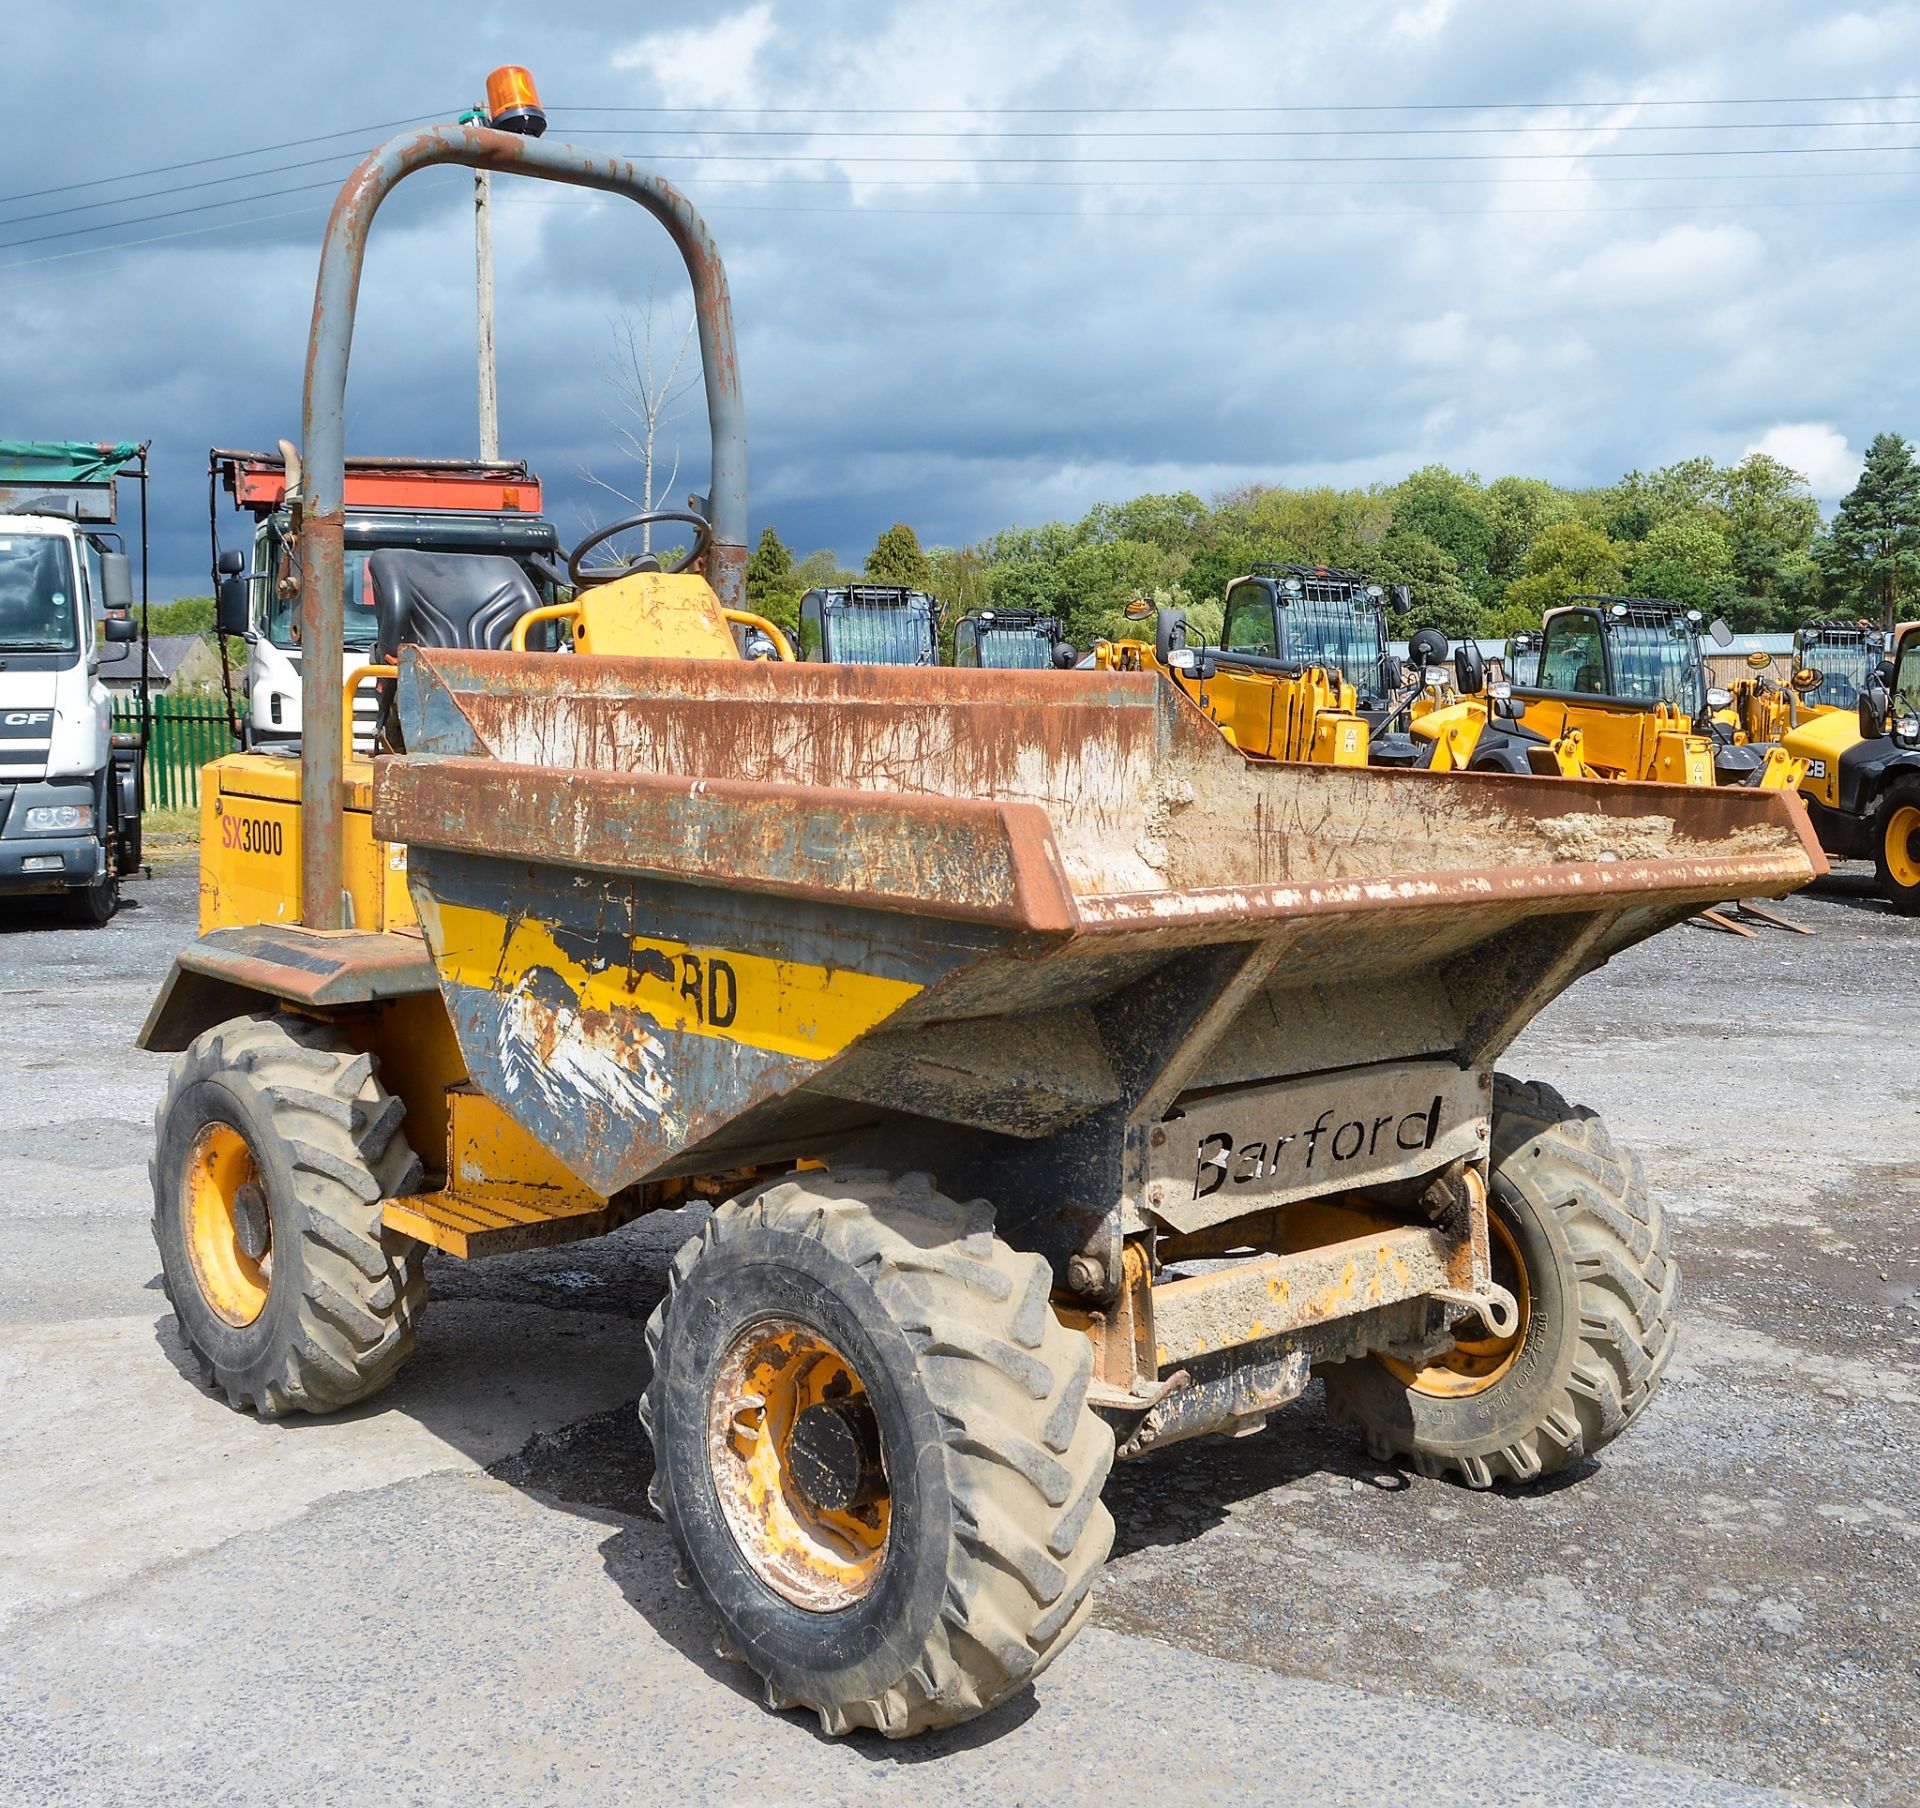 Barford 3 tonne straight skip dumper Year: 2006 S/N: SBTH0815 Recorded Hours: Not displayed (Clock - Image 2 of 11